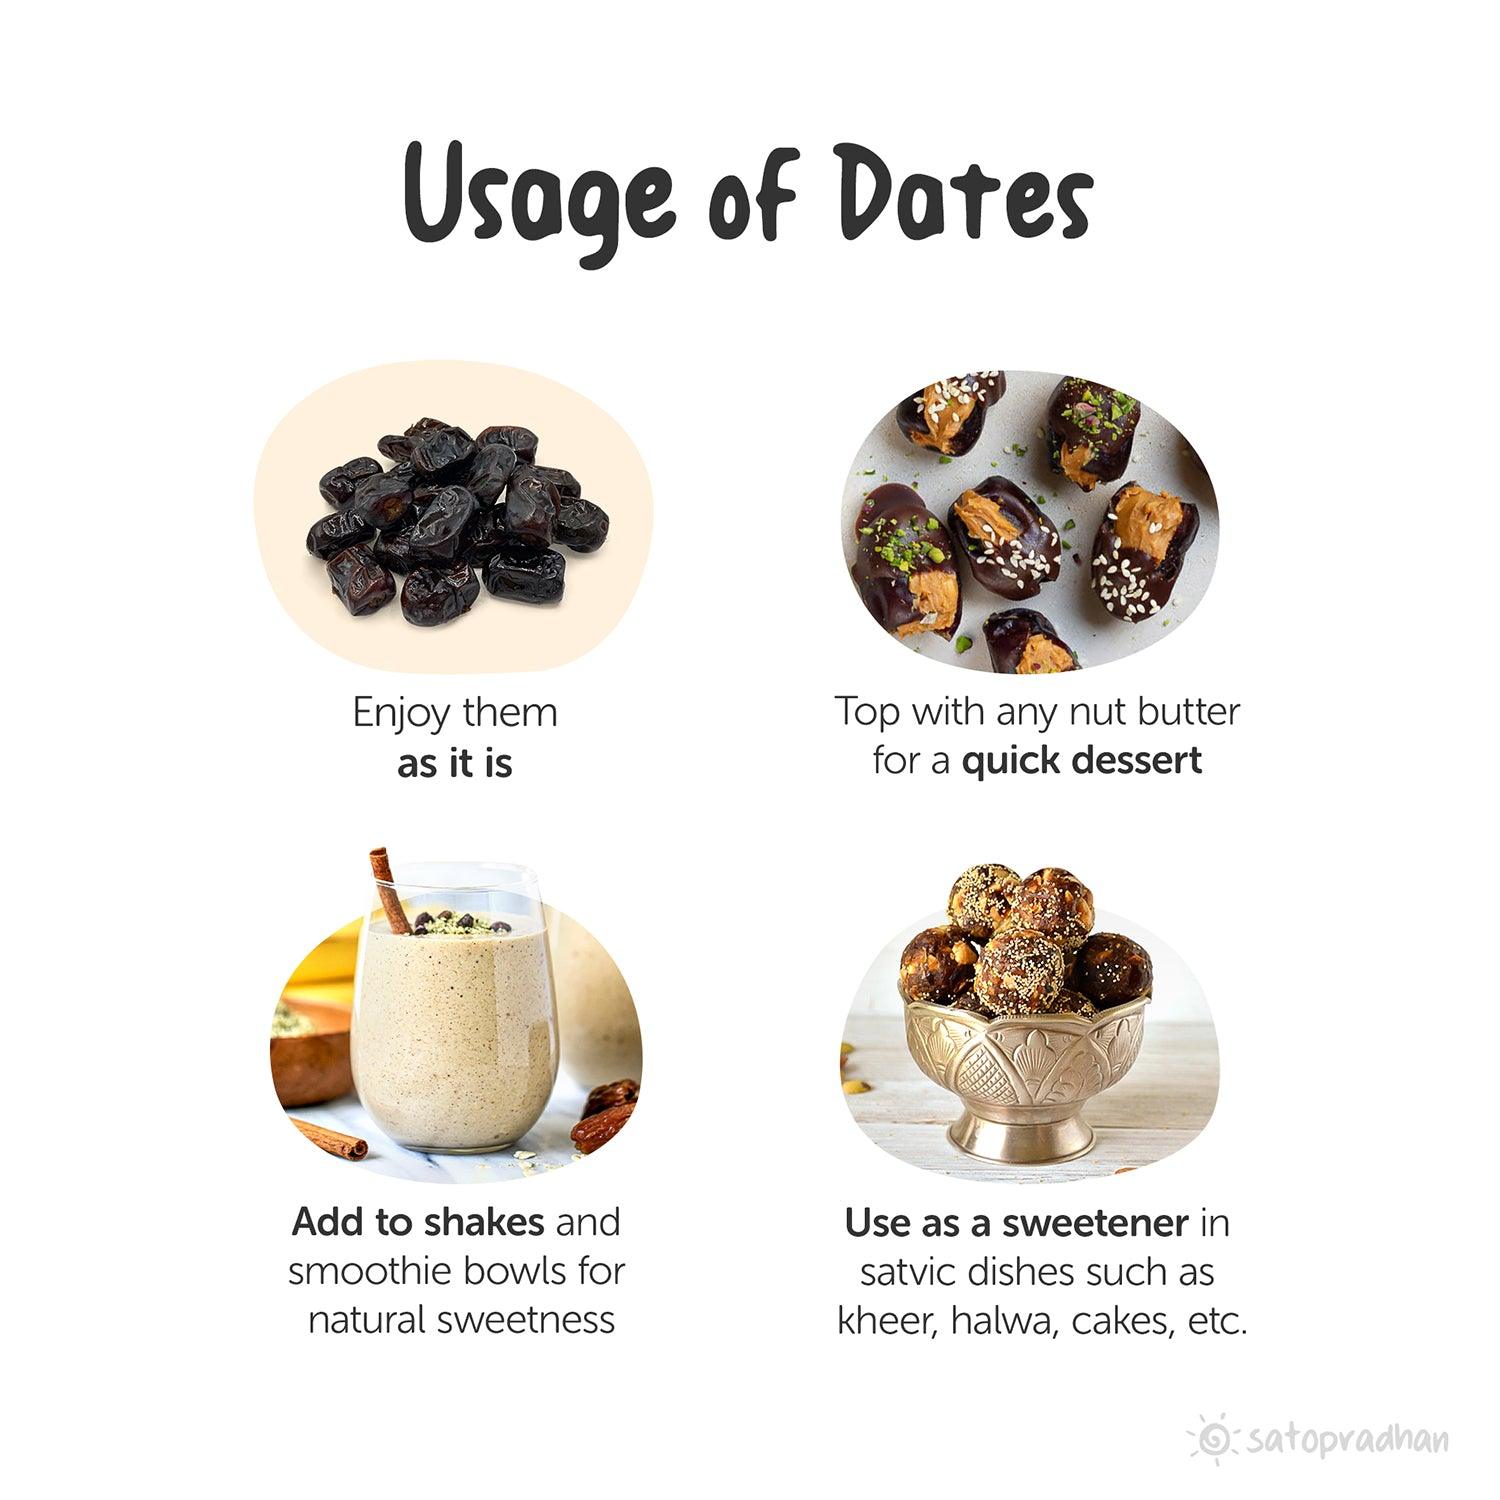 Dates Kimia - Purely Natural & Organic in 700g pack - High Quality Unpitted extremely Soft & Juicy Dates with No Added Sugar, Flavour or Chemical Preservatives - Satopradhan